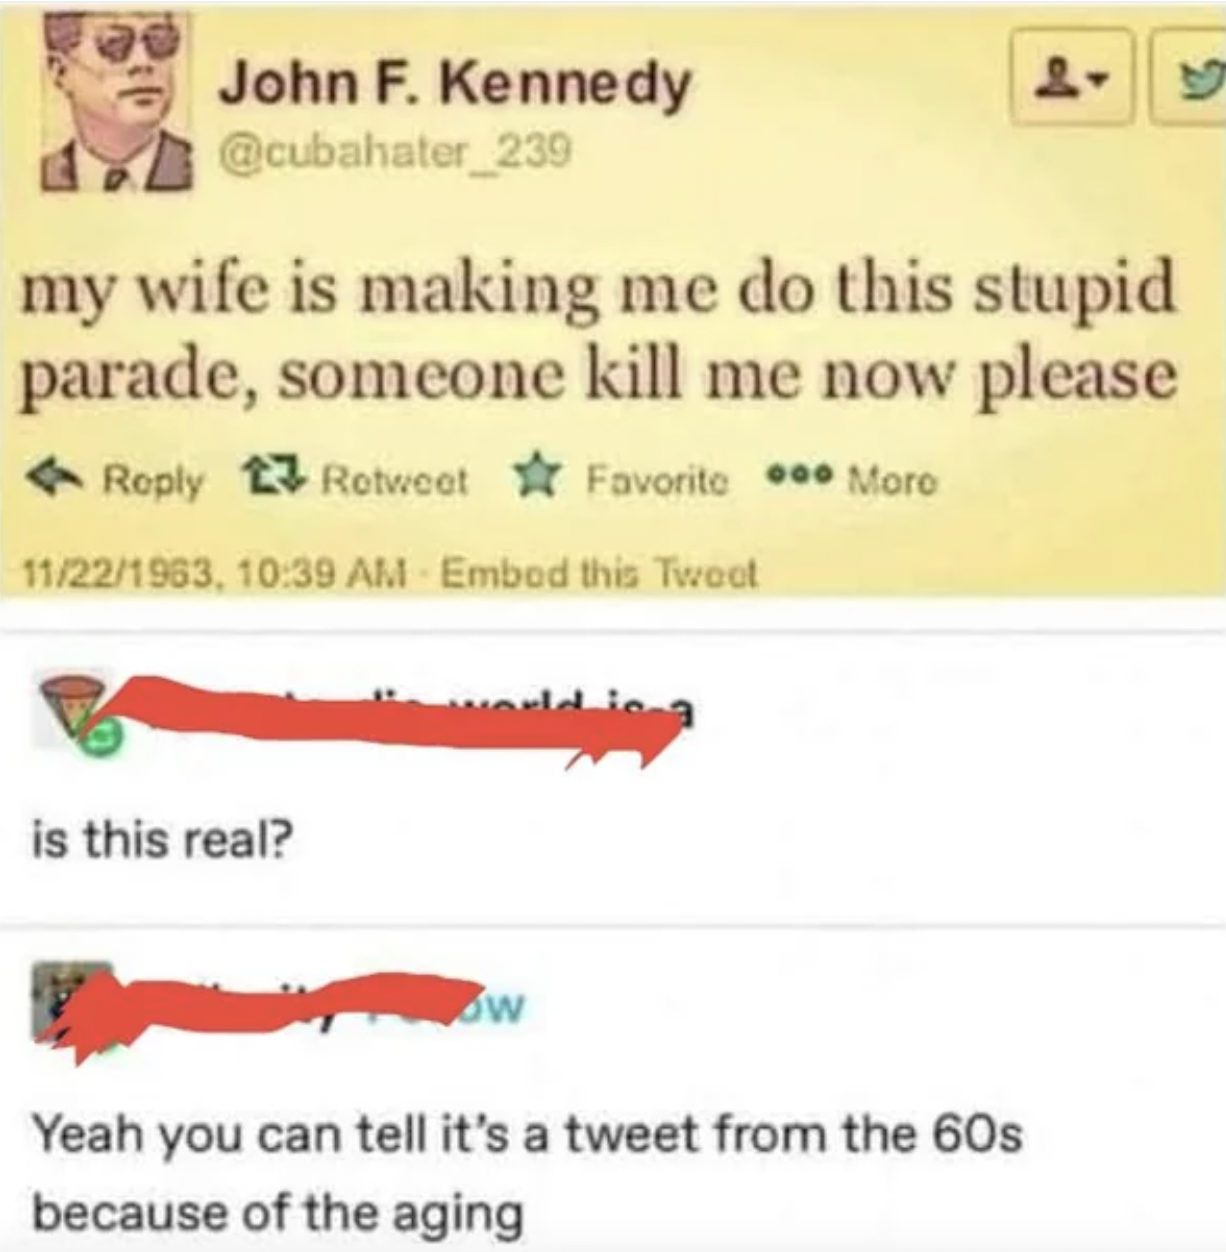 jfk last tweet - John F. Kennedy my wife is making me do this stupid parade, someone kill me now please Favorite ... Moro Retweet 11221963, Embed this Twoot is this real? world is a w Yeah you can tell it's a tweet from the 60s because of the aging